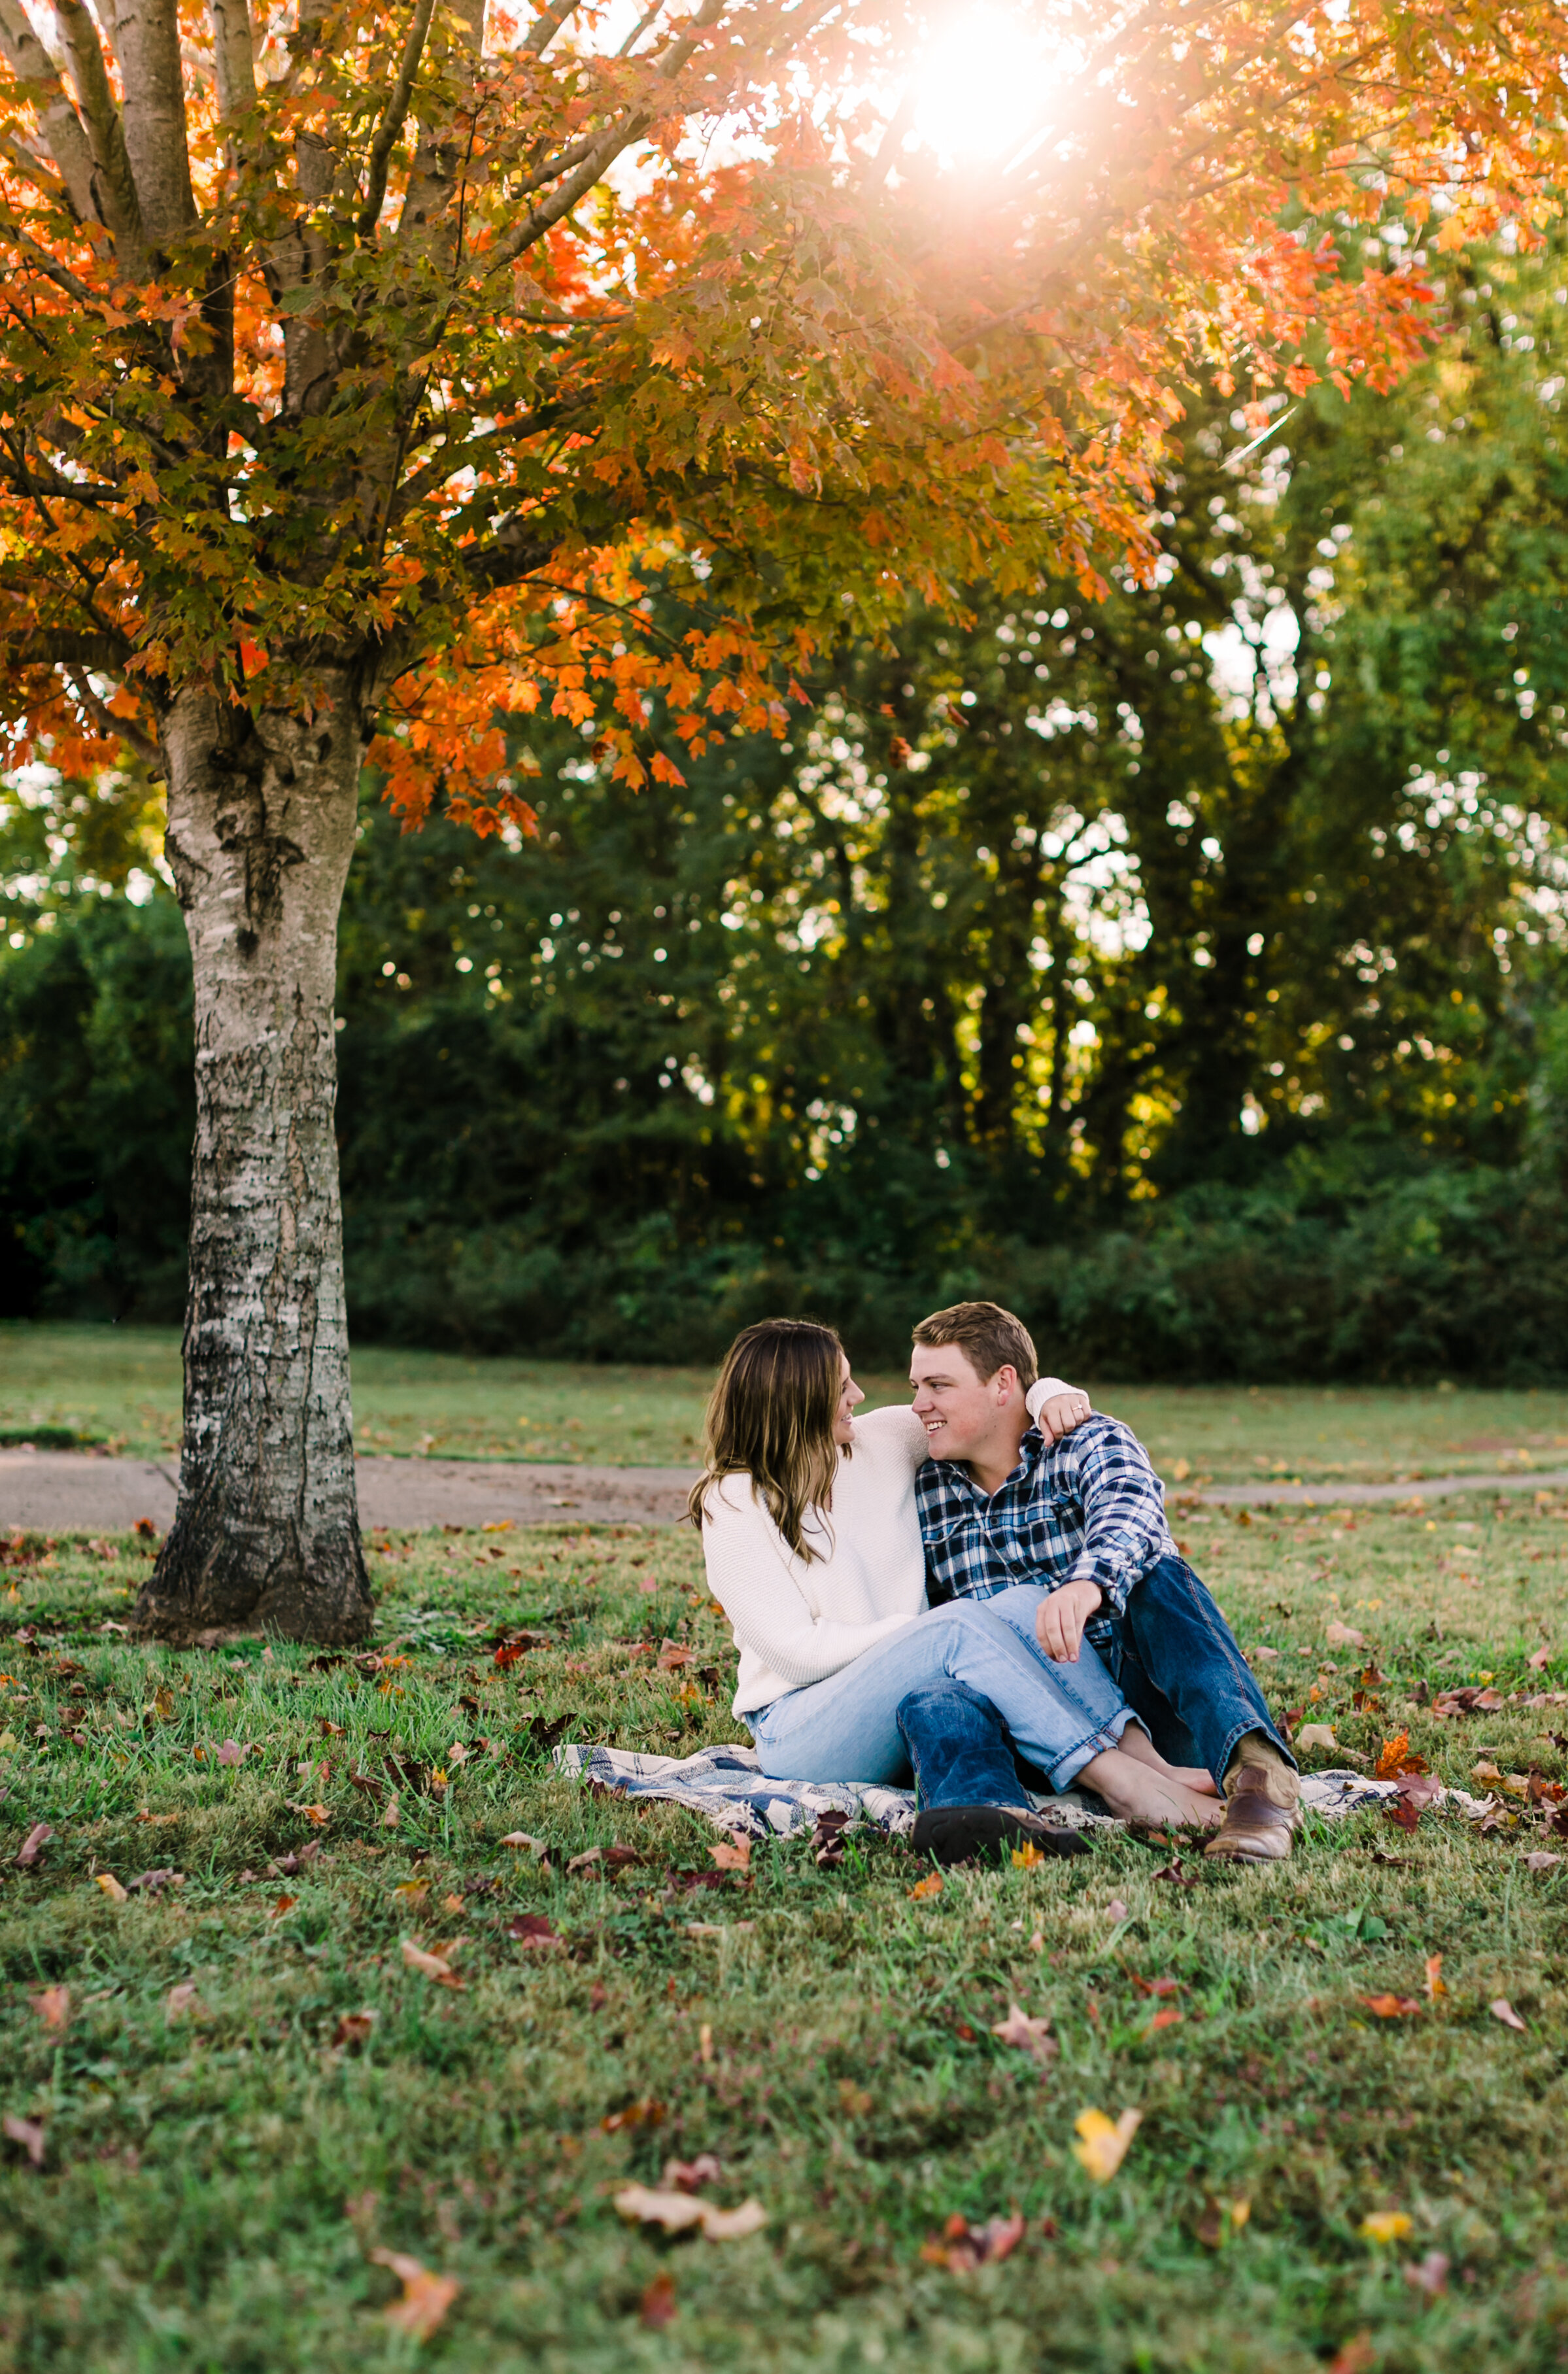 Tennessee+Fall+Engagement+Photos+Puppy (10 of 63).jpg